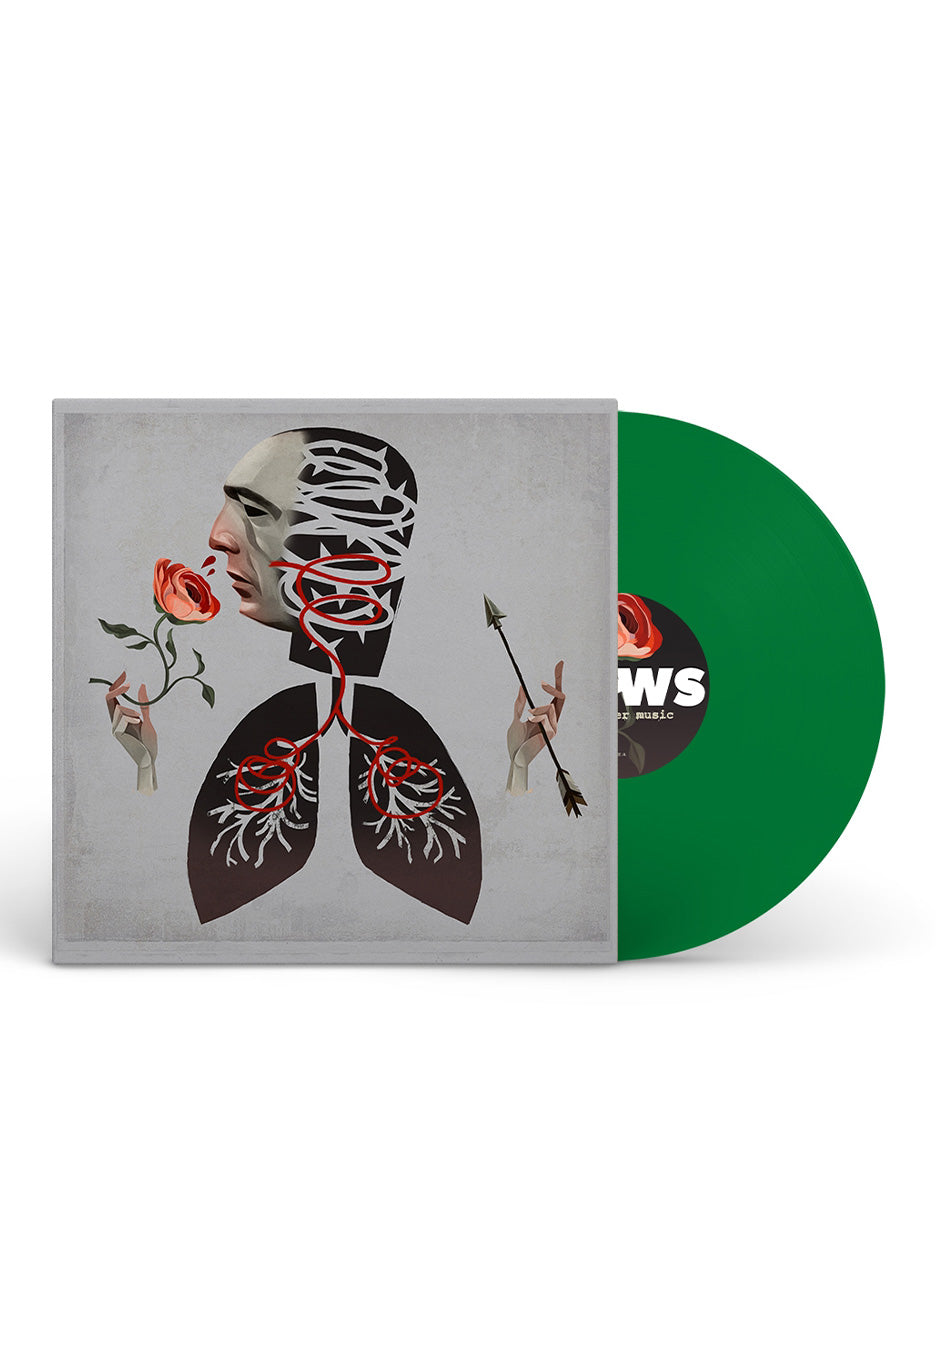 Hot Water Music - Vows Ltd. Leaf Green - Colored Vinyl | Neutral-Image